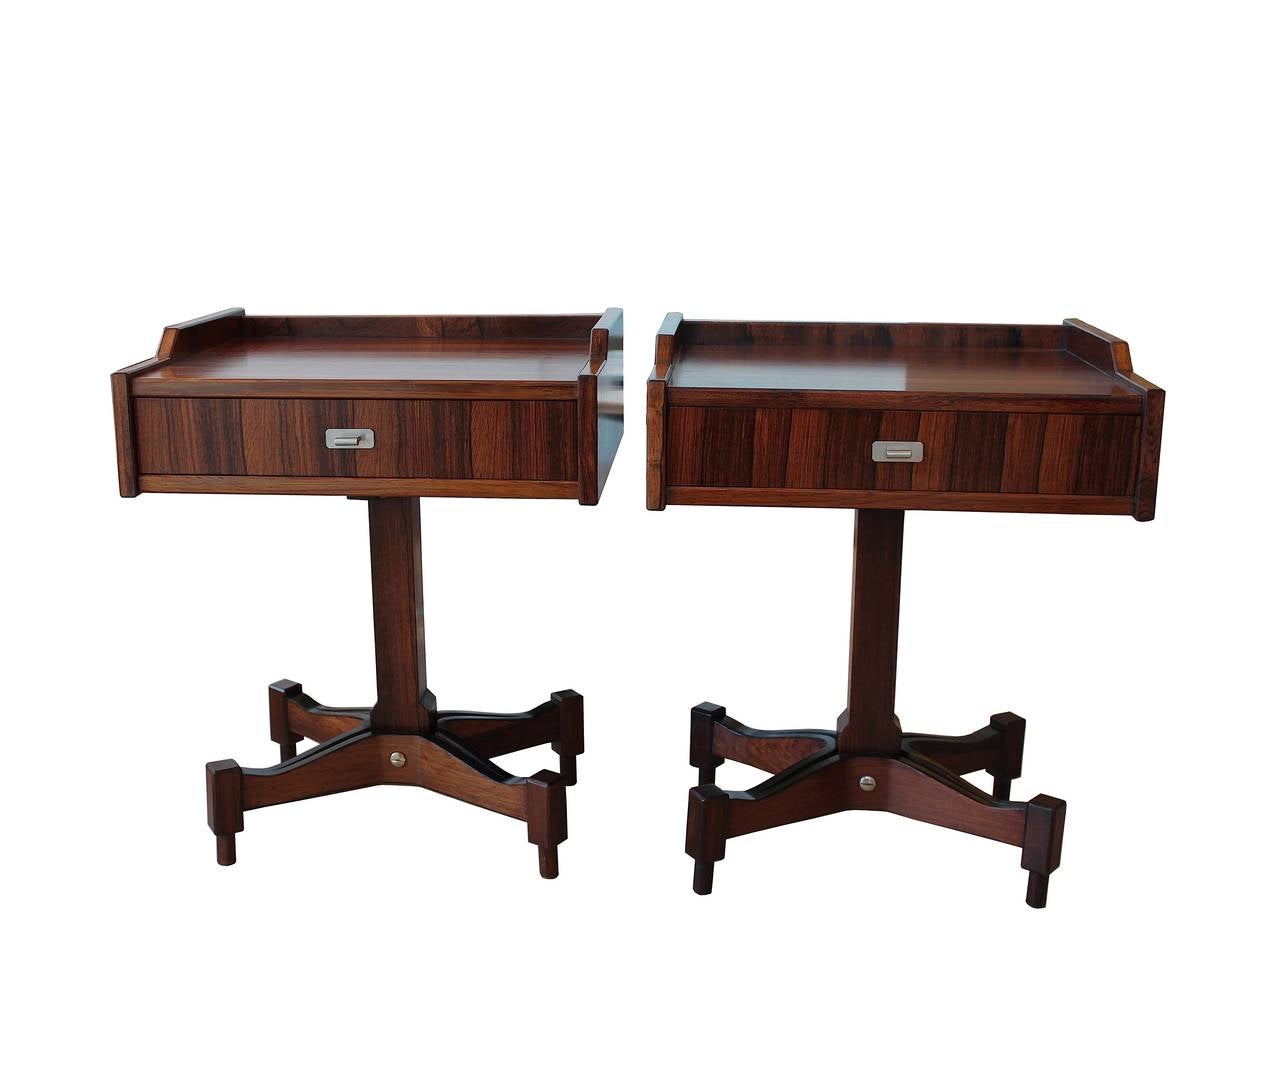 Pair of rosewood side tables with single drawer and nickelled metal handles by Claudio Salocchi.
Edited by Sormani.